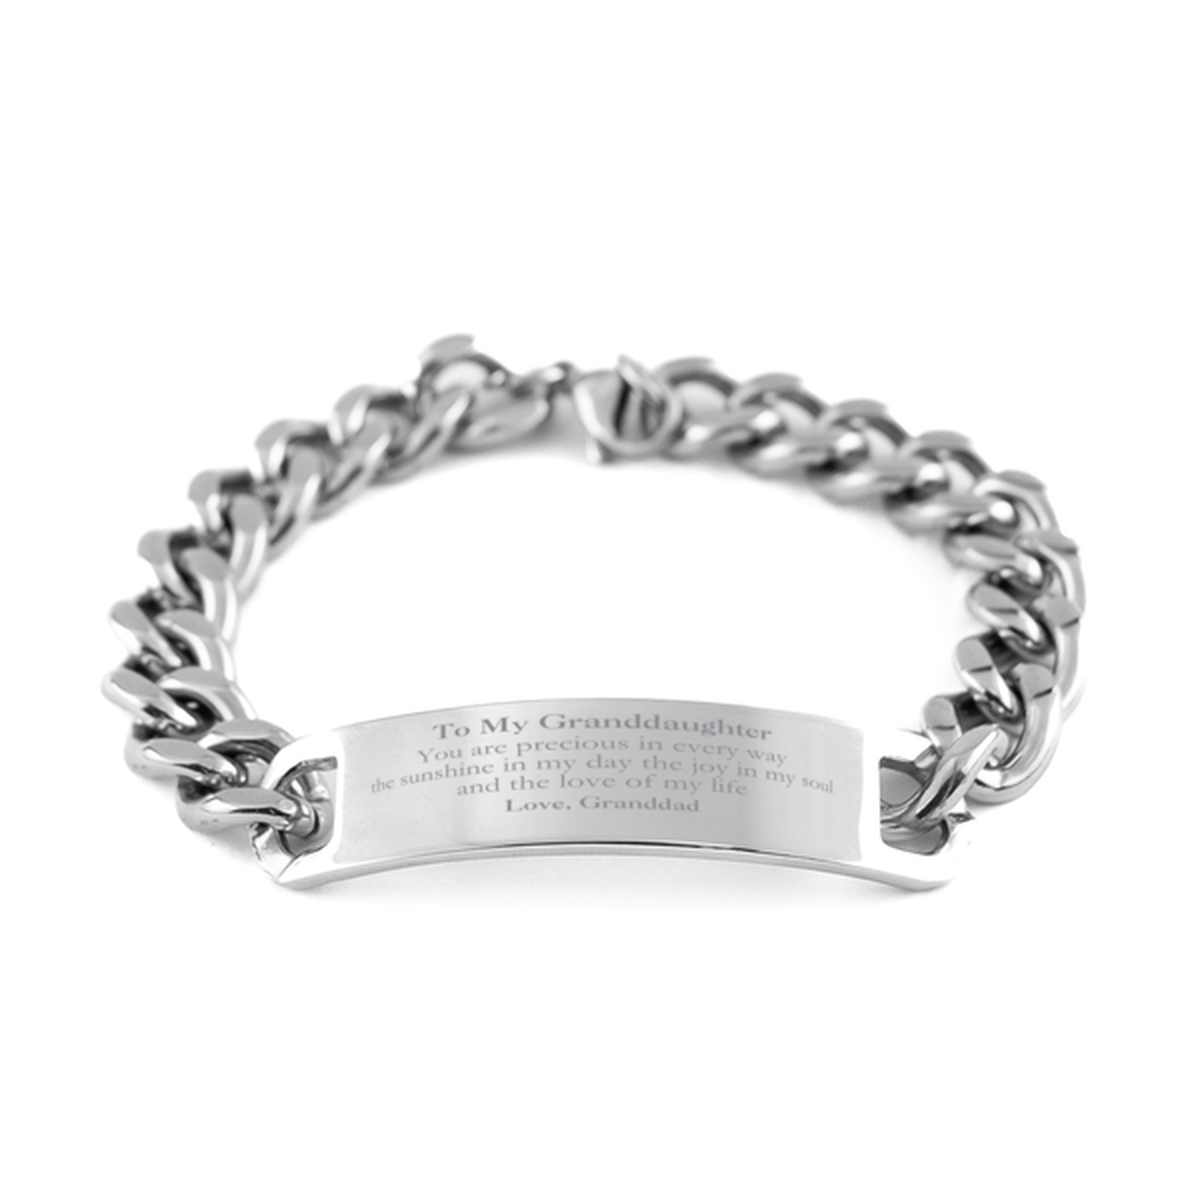 Graduation Gifts for Granddaughter Cuban Chain Stainless Steel Bracelet Present from Granddad, Christmas Granddaughter Birthday Gifts Granddaughter You are precious in every way the sunshine in my day. Love, Granddad